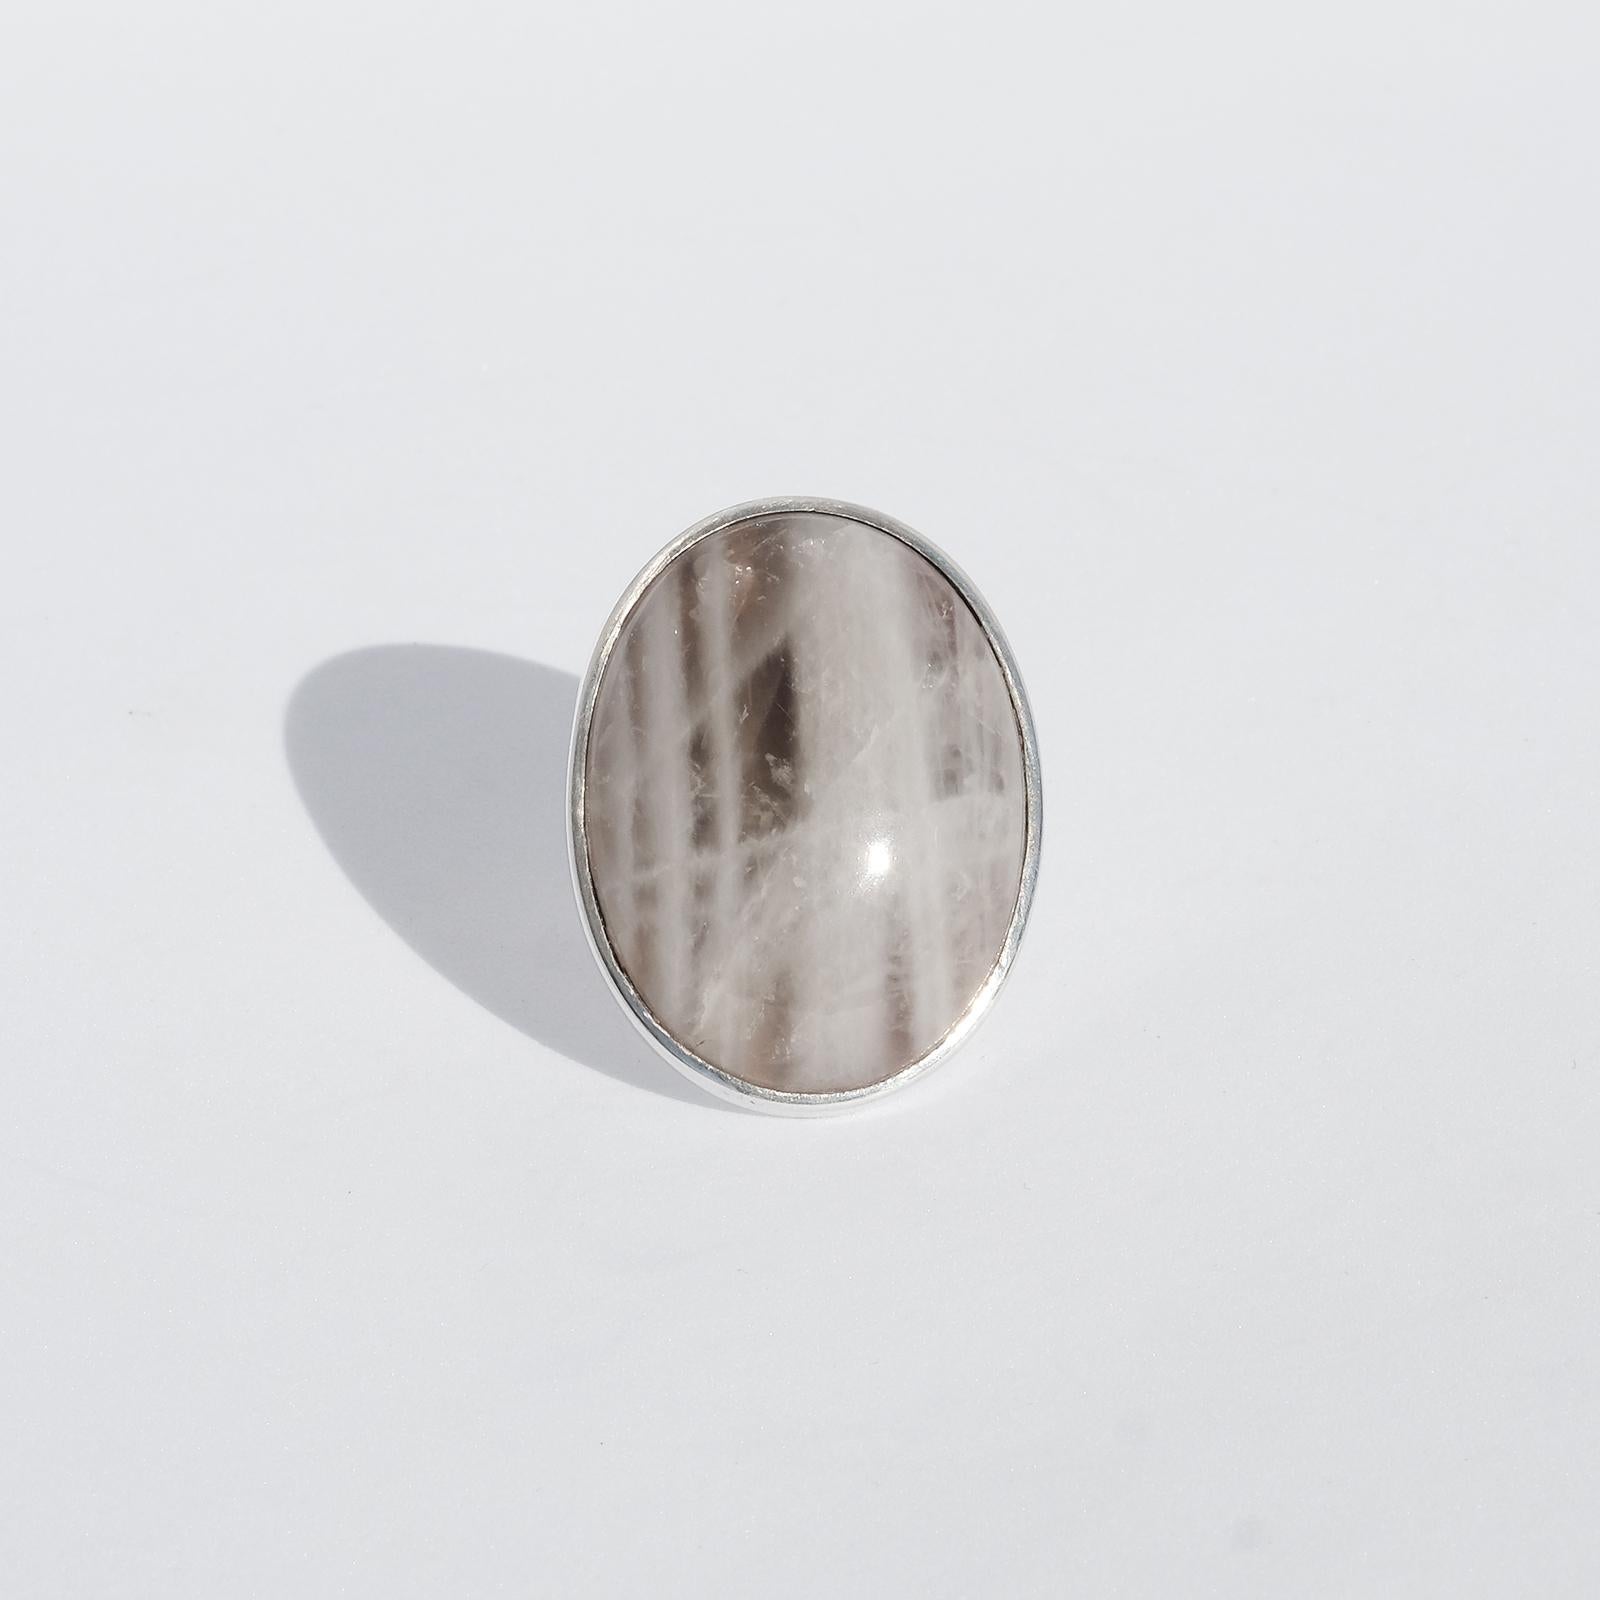 This very large sterling silver ring is adorned by a large, oval cut grey agat stone. The agat stone shifts lightly in light brown and it has a striped pattern very harmonious for the eye to look at. Made by Kaunis Koru Oy 1974.

The